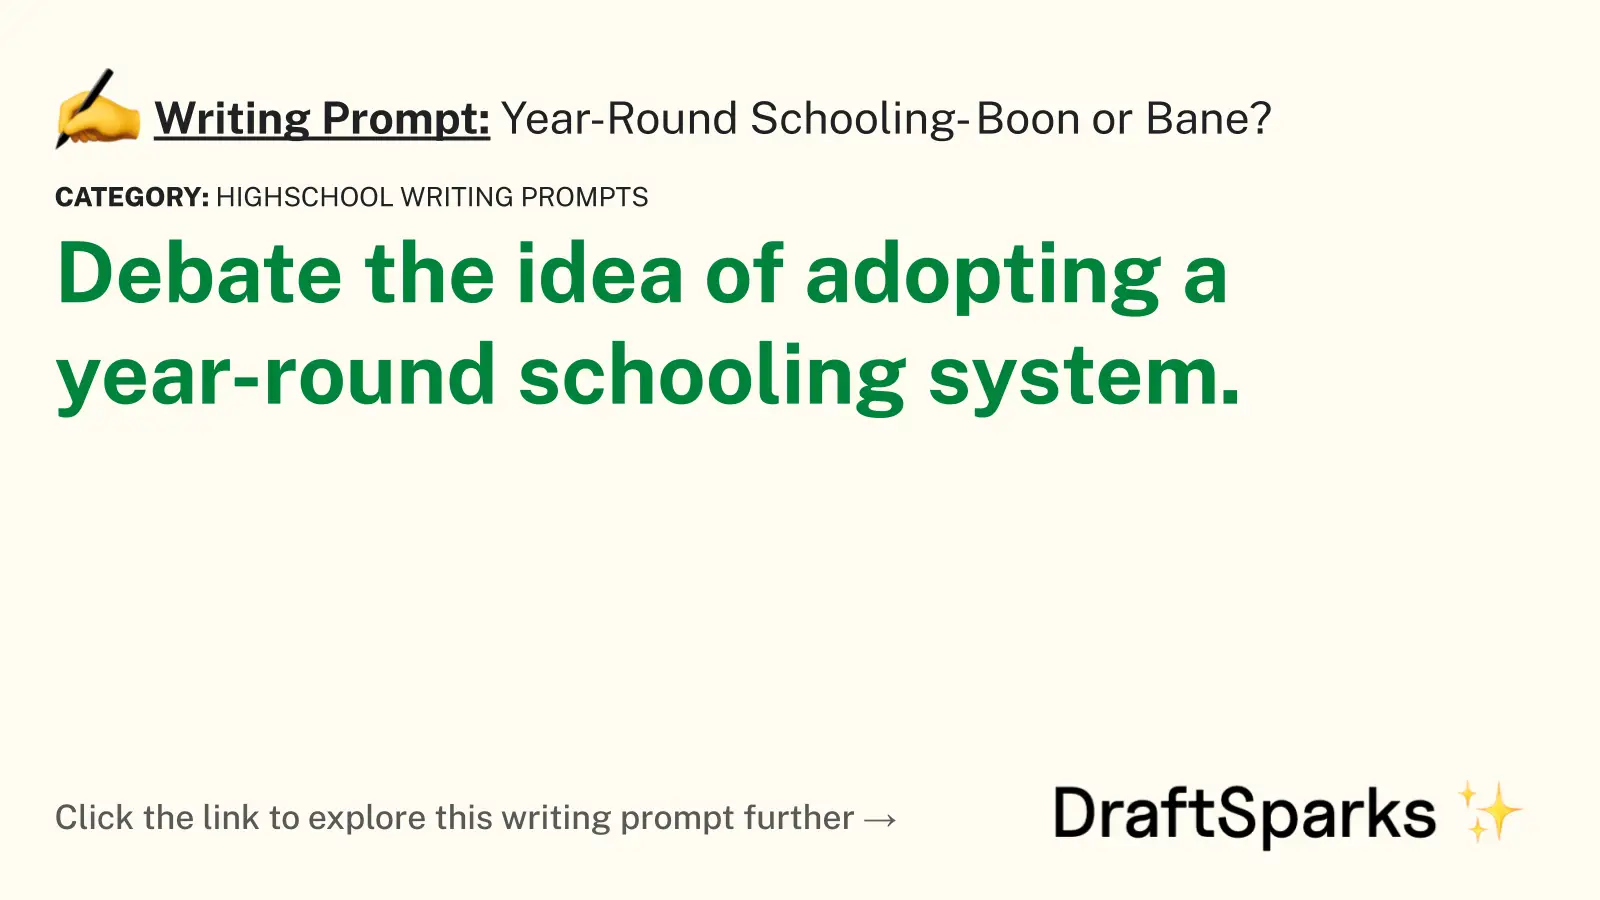 Year-Round Schooling- Boon or Bane?